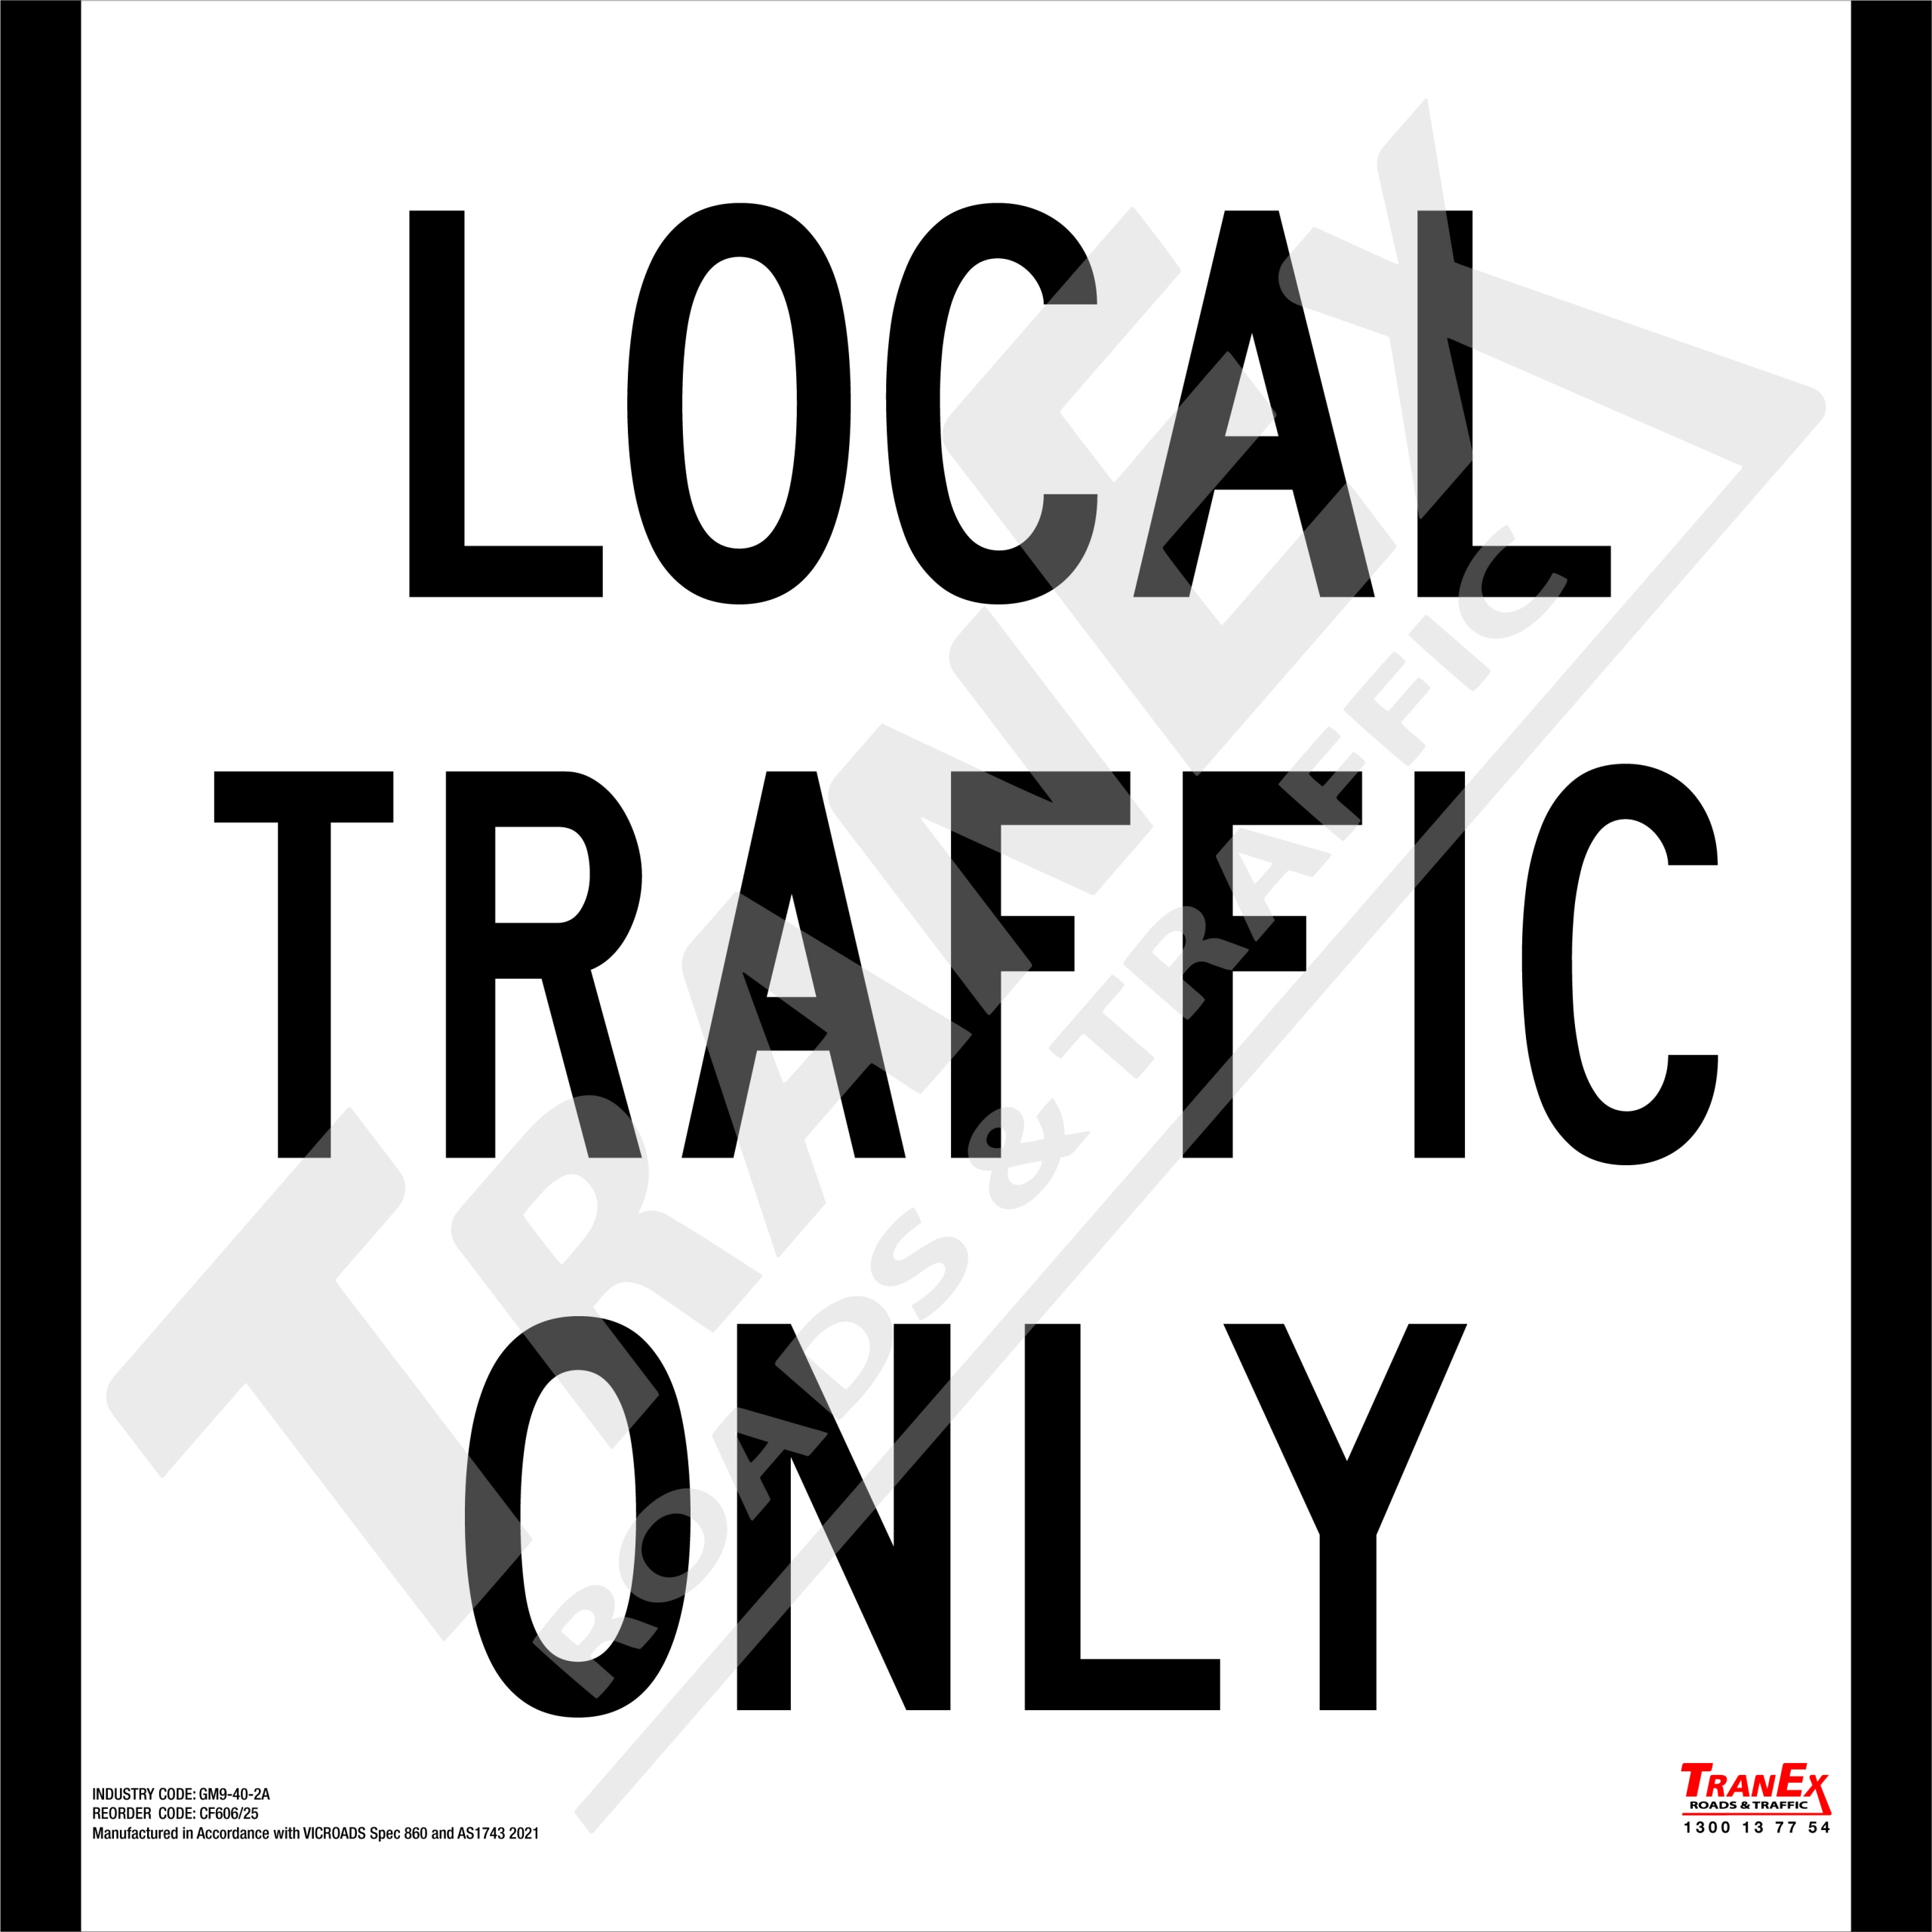 GM9-40-2A_LOCAL TRAFFIC ONLY_600x600